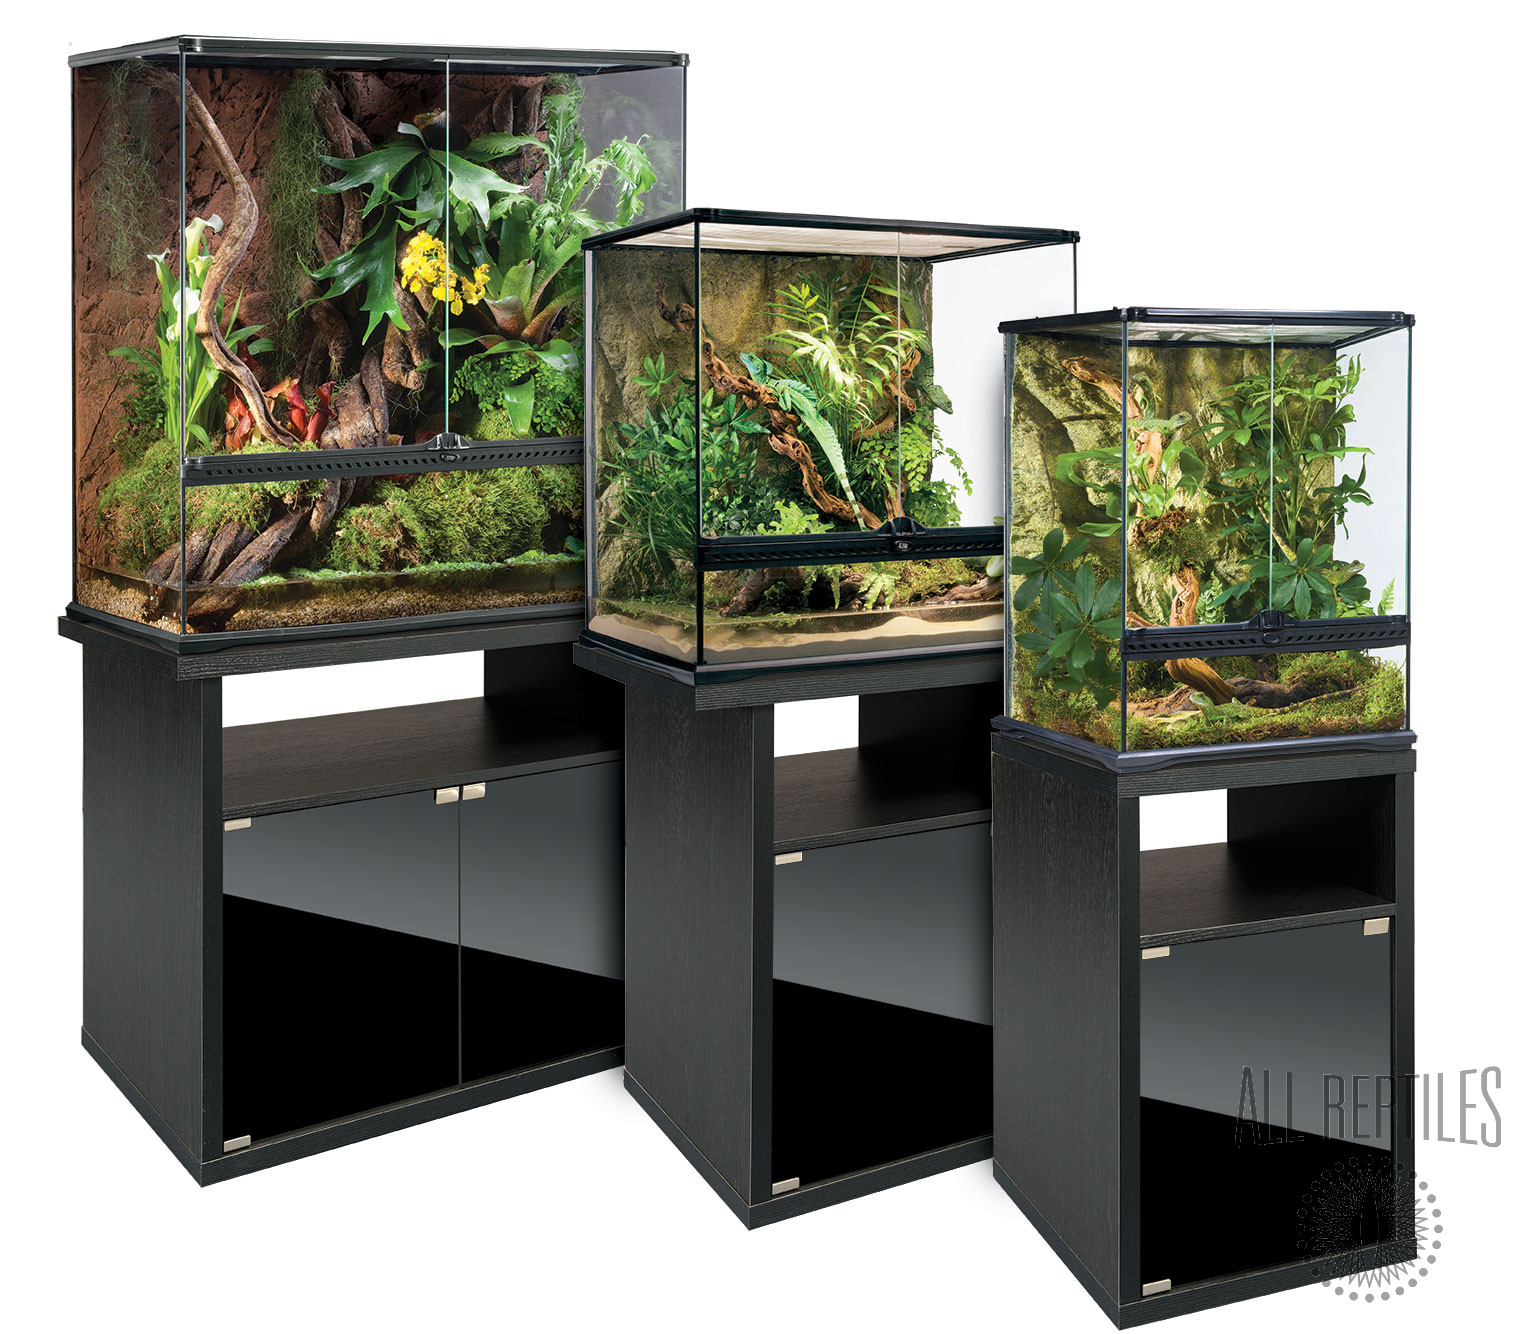 reptile tank and stand